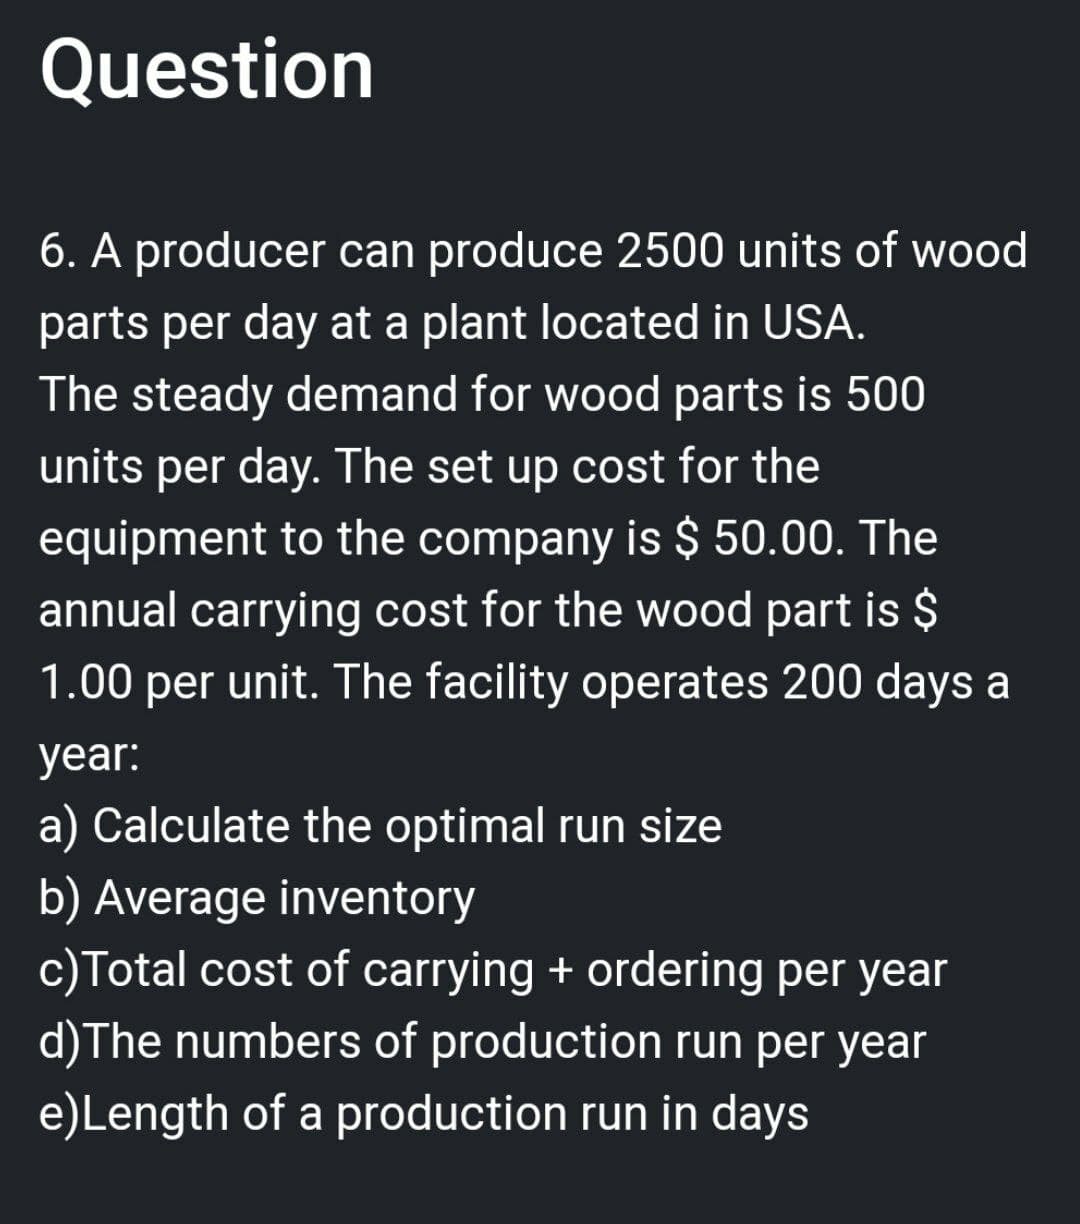 Question
6. A producer can produce 2500 units of wood
parts per day at a plant located in USA.
The steady demand for wood parts is 500
units per day. The set up cost for the
equipment to the company is $ 50.00. The
annual carrying cost for the wood part is $
1.00 per unit. The facility operates 200 days a
year:
a) Calculate the optimal run size
b) Average inventory
c) Total cost of carrying + ordering per year
d) The numbers of production run per year
e) Length of a production run in days